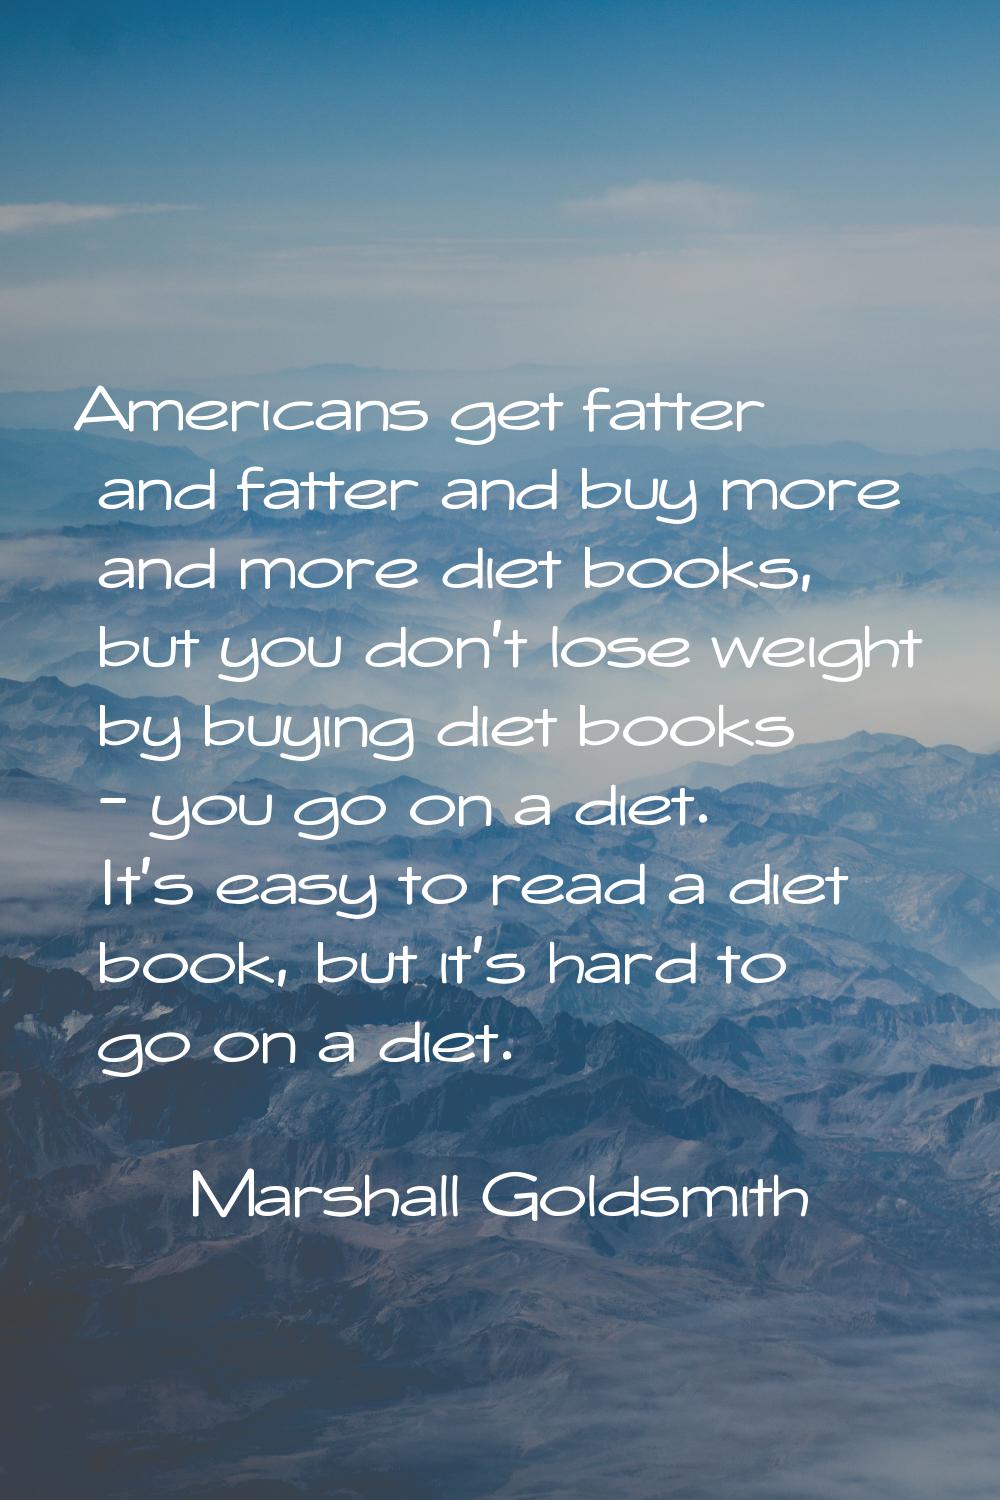 Americans get fatter and fatter and buy more and more diet books, but you don't lose weight by buyi